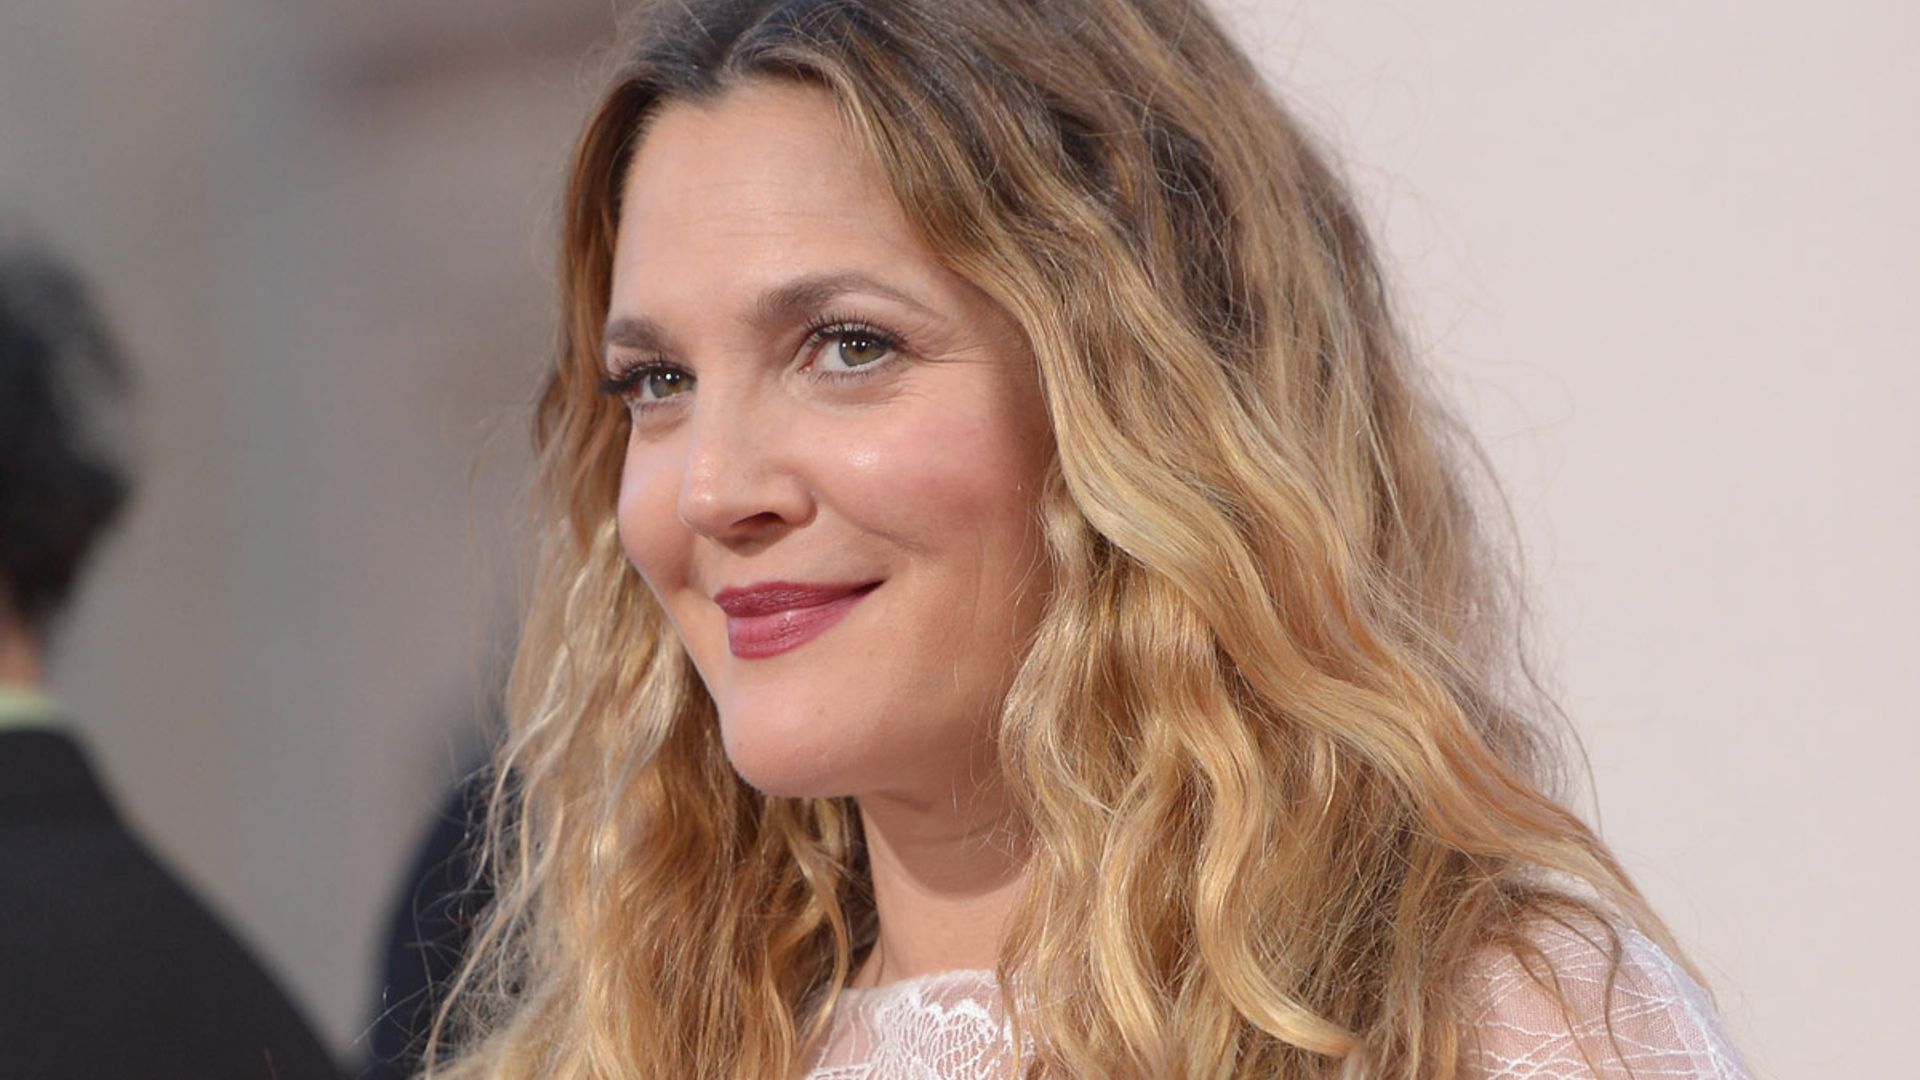 Drew Barrymore: news and pictures, movies, her wedding, baby news and more